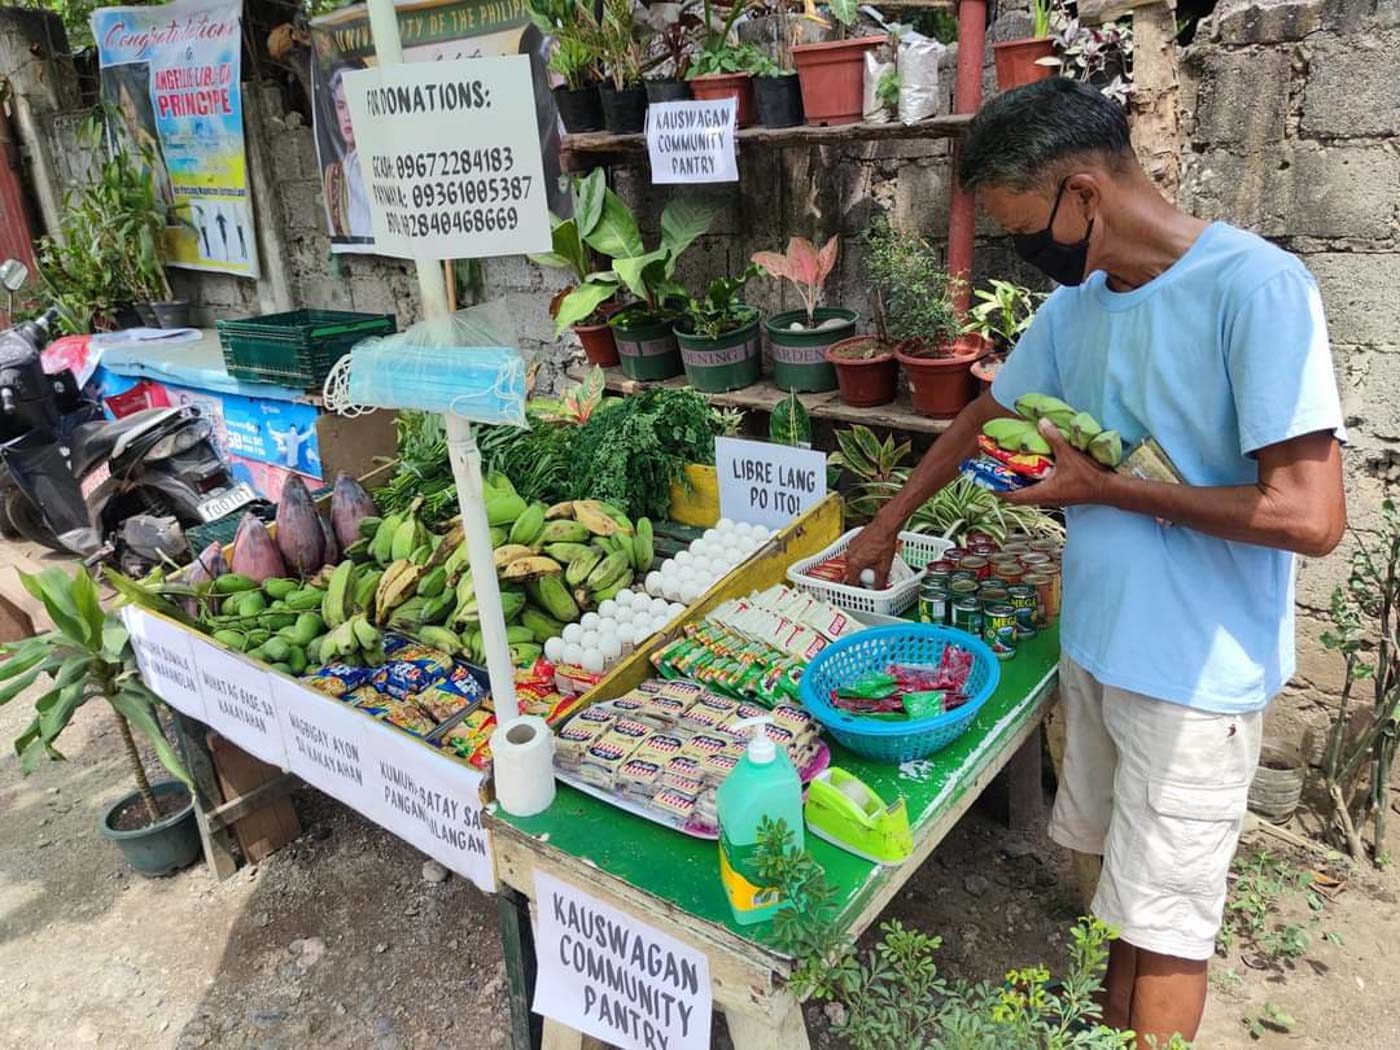 Community pantry goes viral even in Mindanao